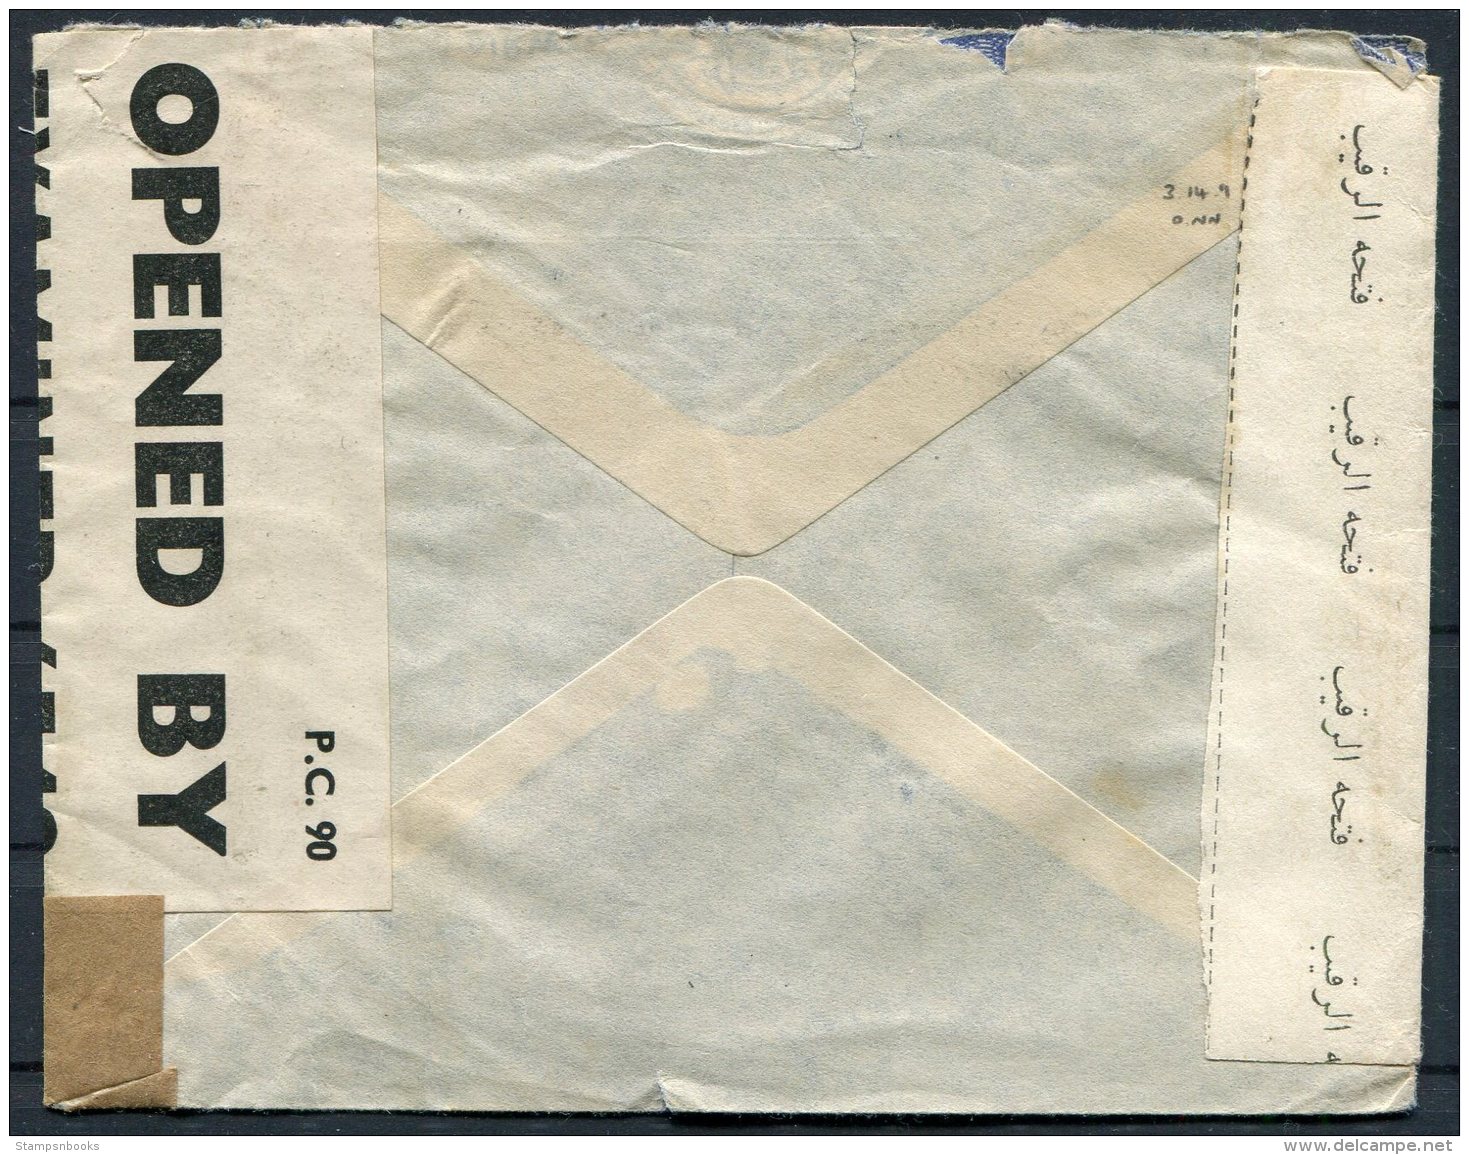 1941 Iraq Faiha Trading Corp Censor Airmail Cover - Hatch End, Middlesex, England - Iraq